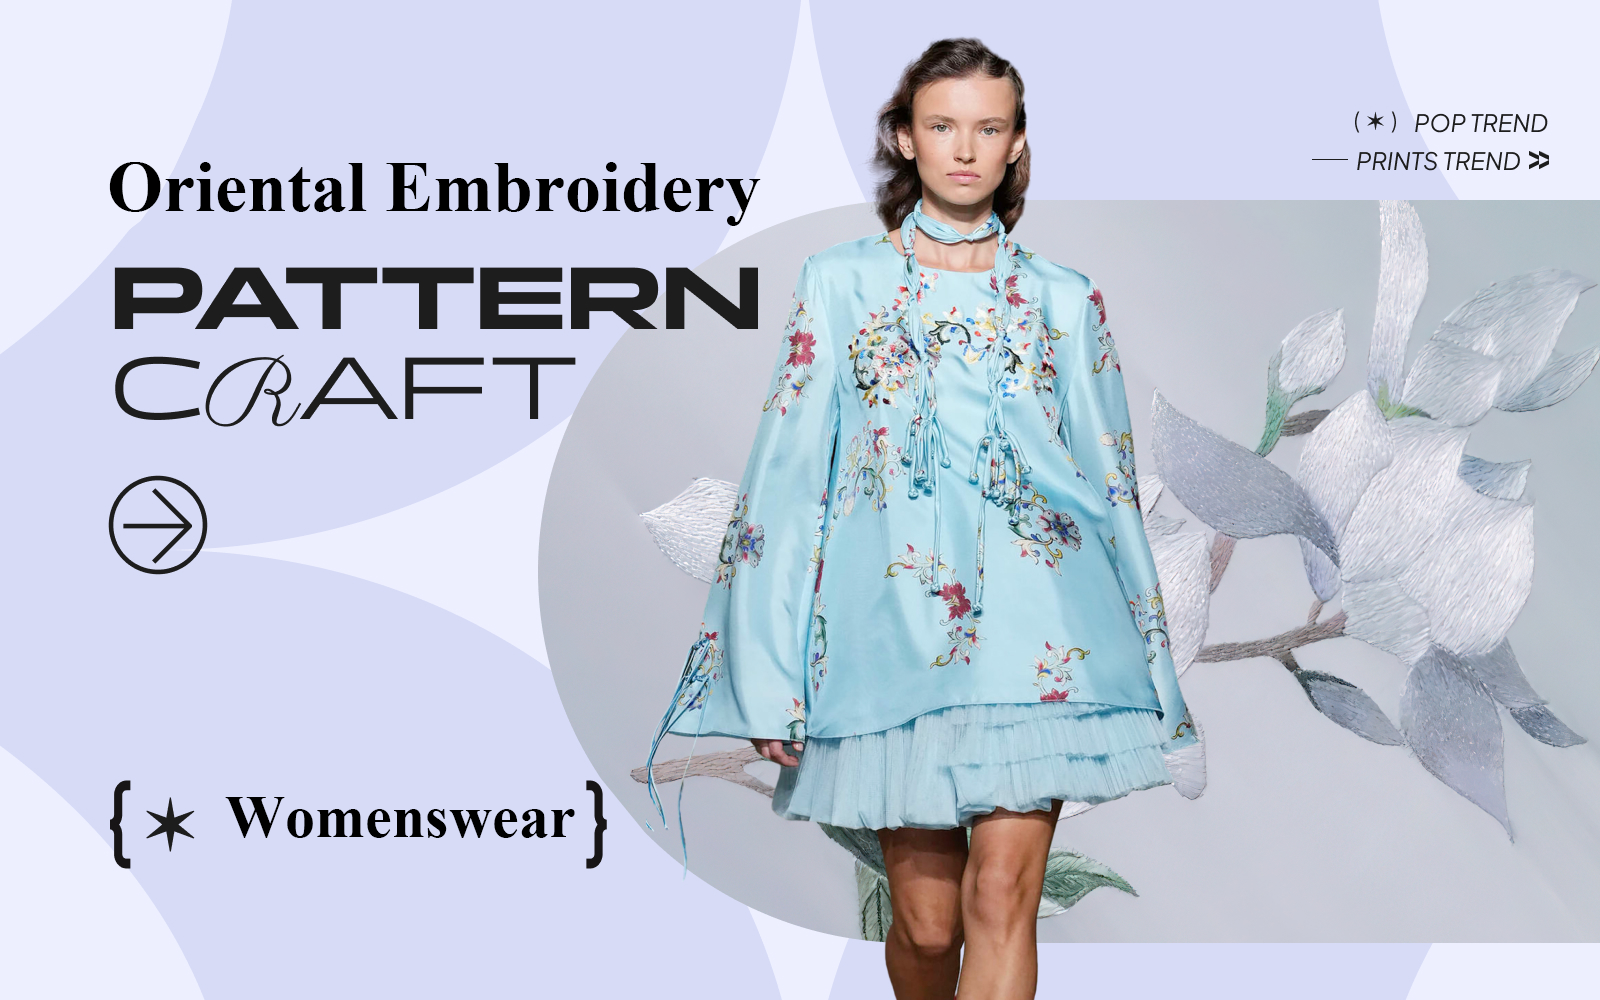 Oriental Embroidery -- The Pattern Craft Trend for Womenswear